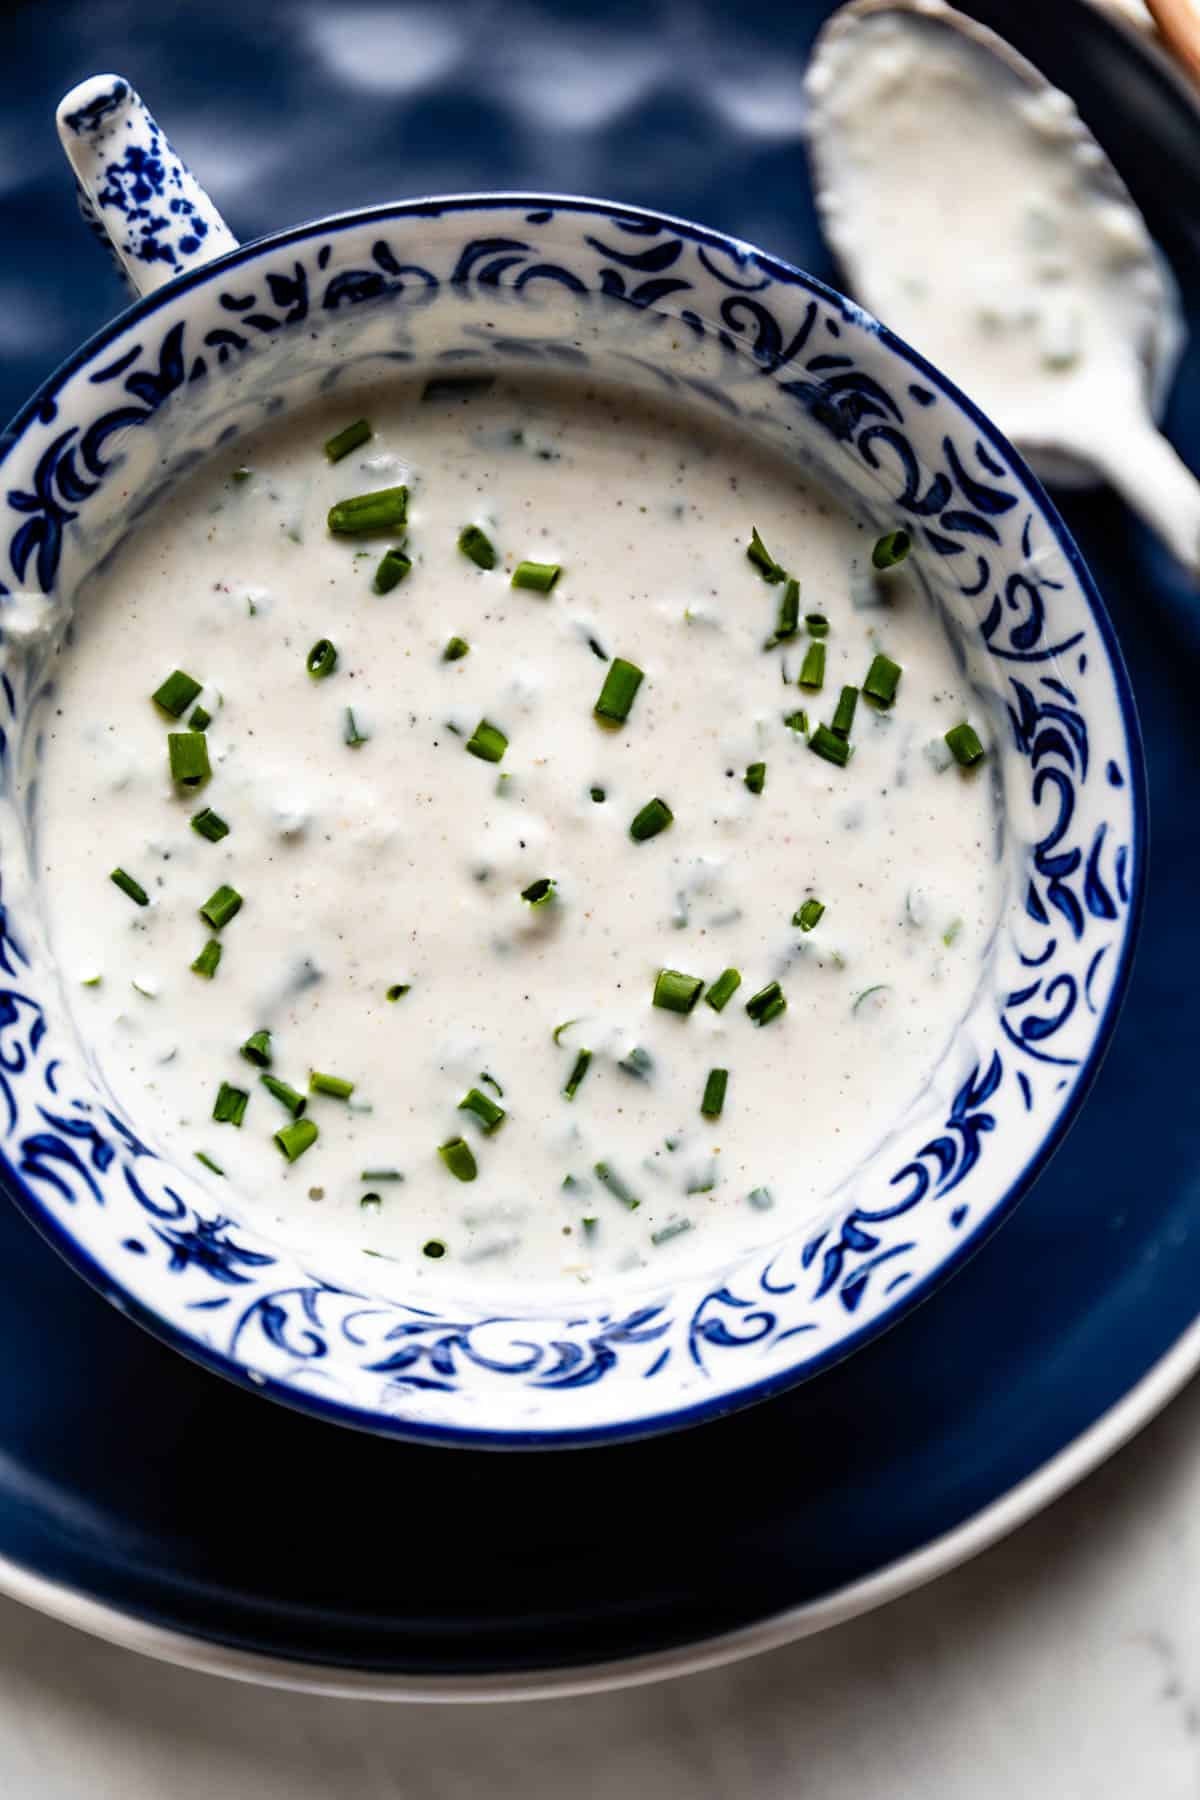 A bowl of horseradish yogurt sauce from the top view.